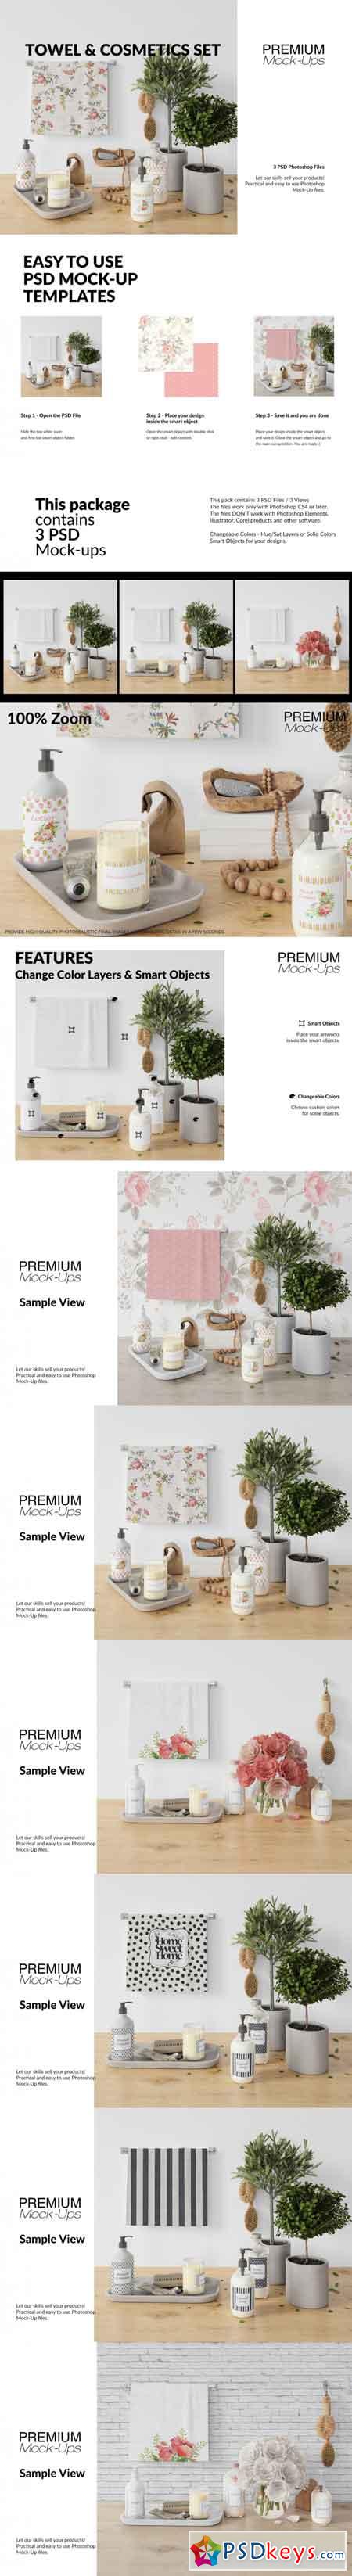 Product Mock-ups » page 7 » Free Download Photoshop Vector Stock image ...